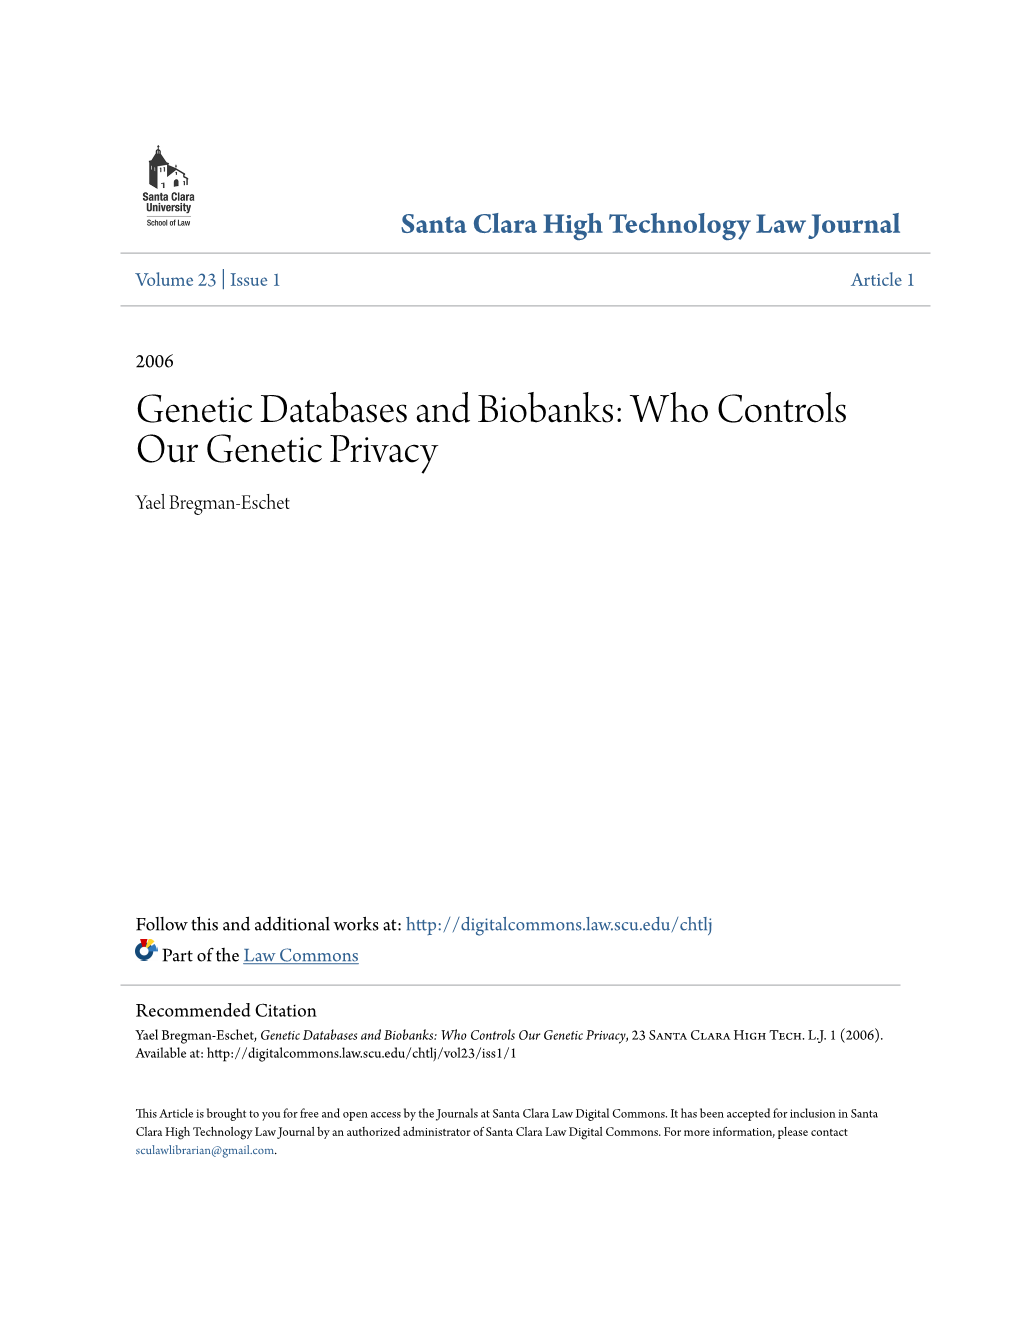 Genetic Databases and Biobanks: Who Controls Our Genetic Privacy Yael Bregman-Eschet